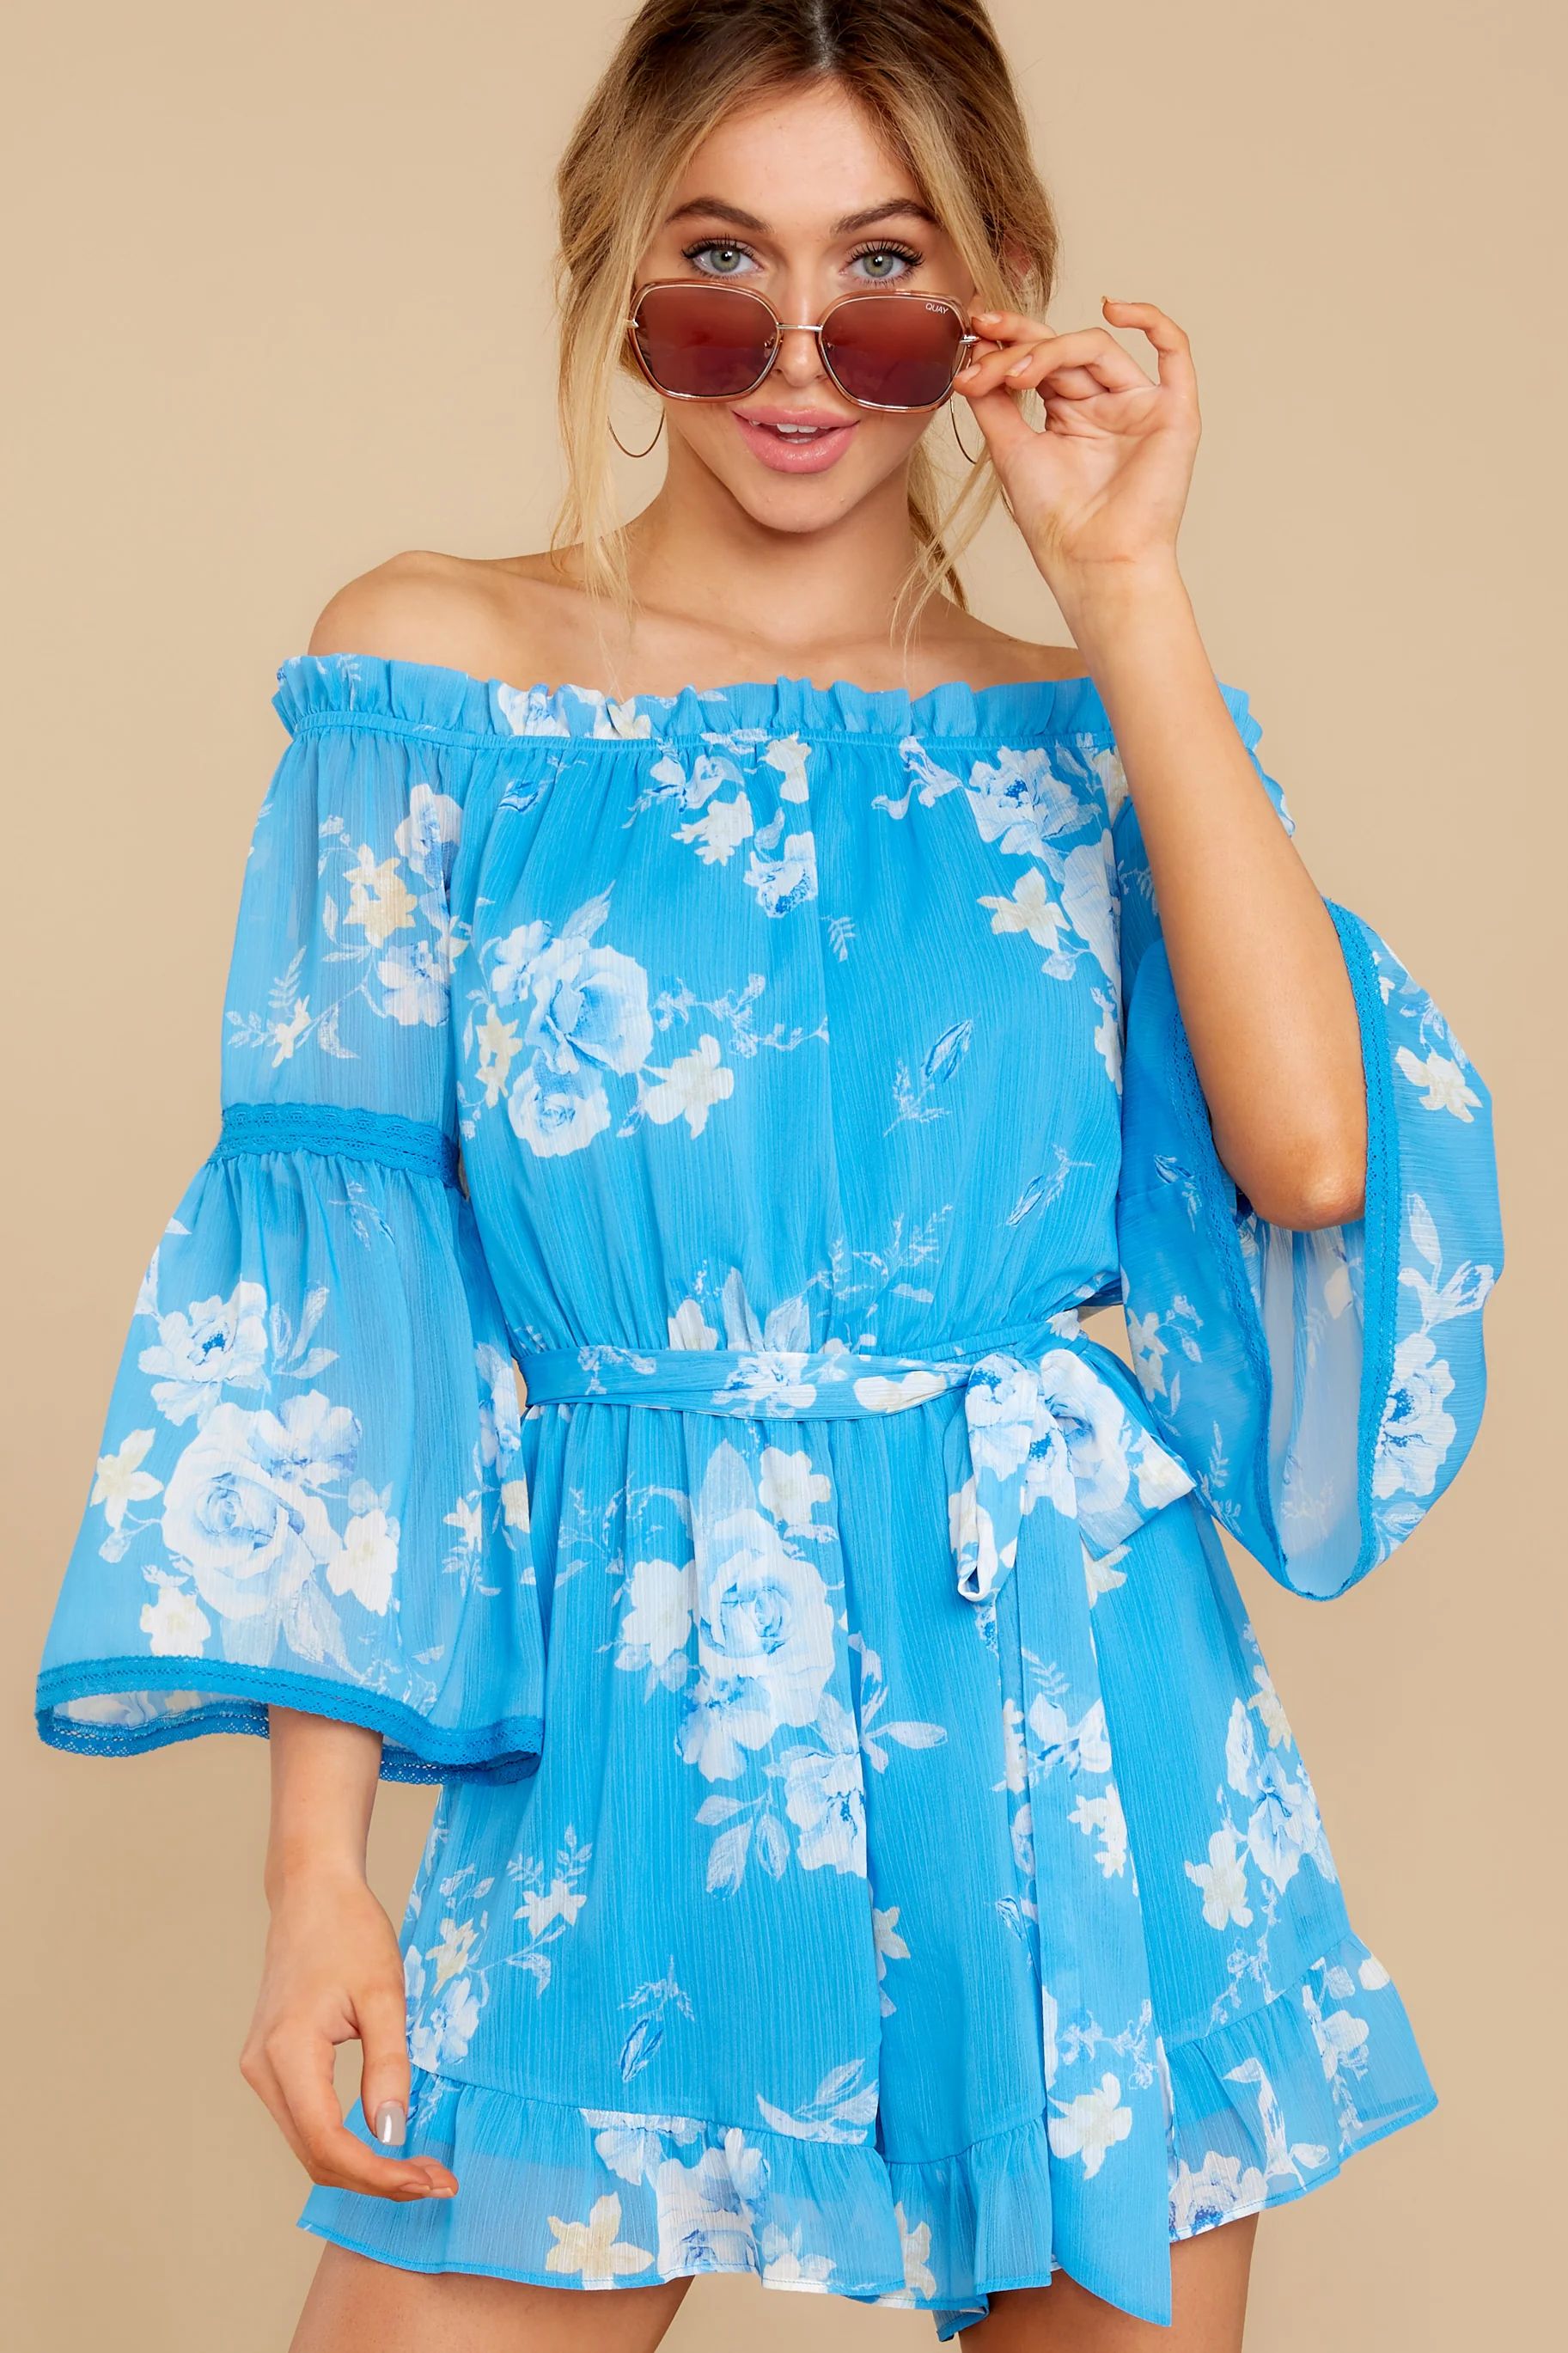 Hoping For You Bright Blue Print Romper | Red Dress 